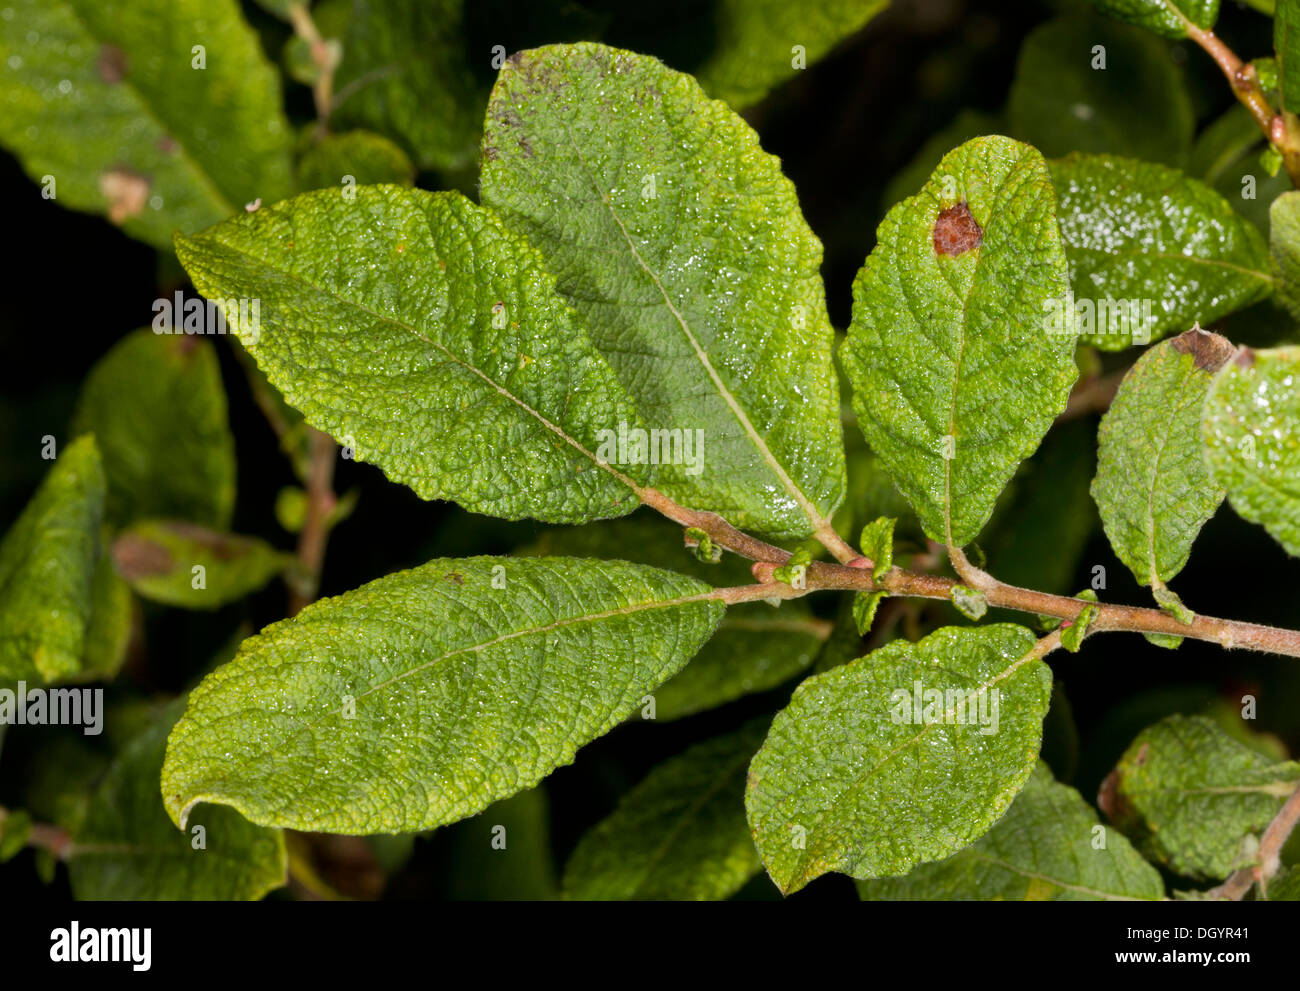 Eared Willow, Salix aurita showing wrinkled leaves and persistent stipules. Devon Stock Photo